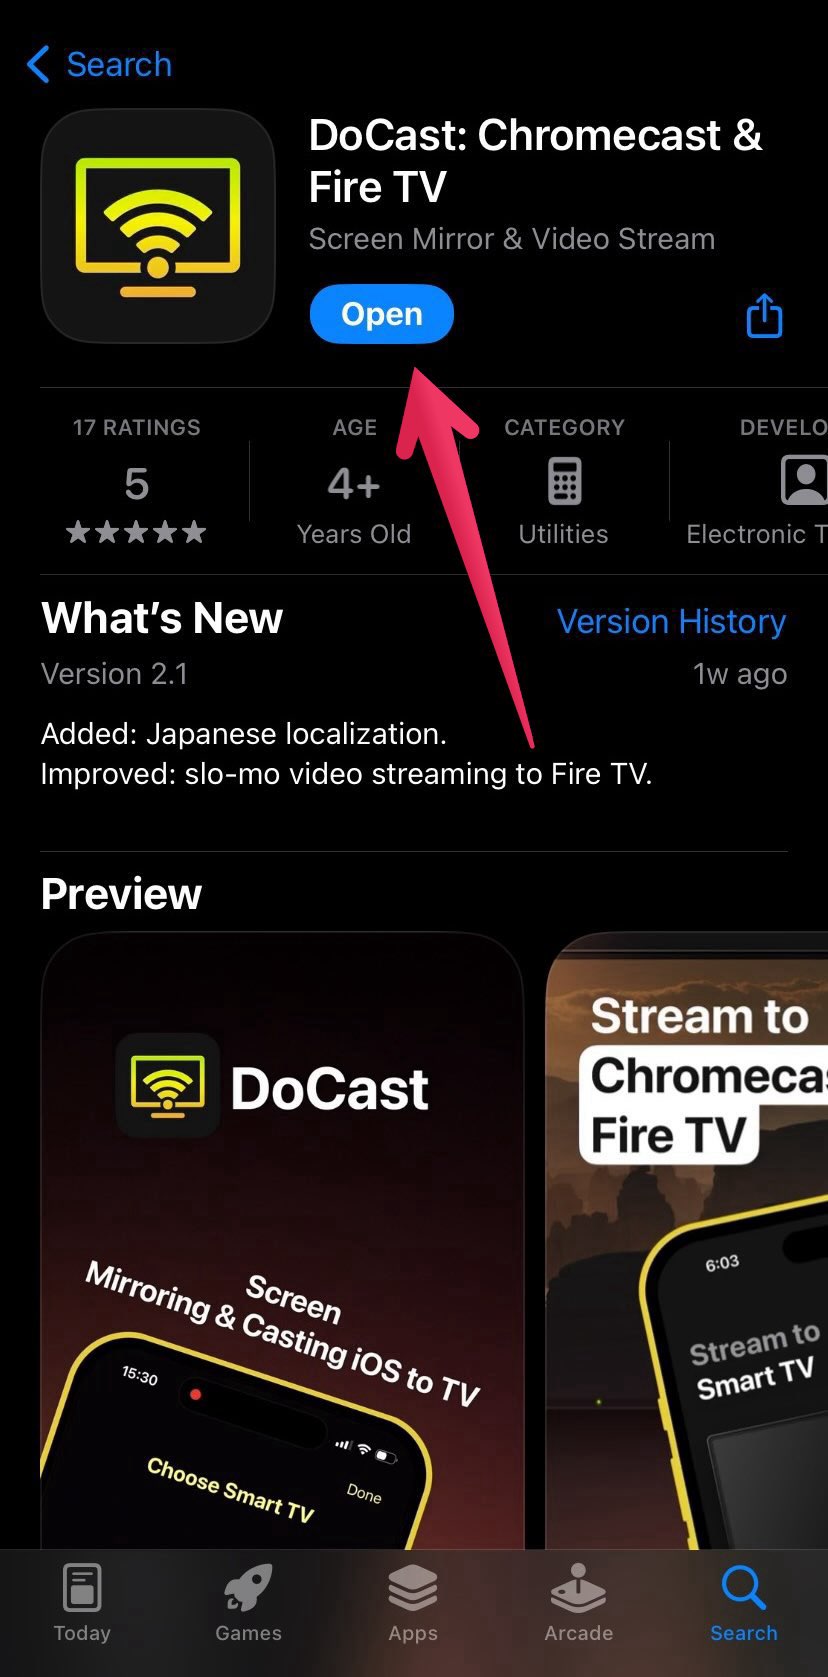 Find and download DoCast from the App Store on your iPhone